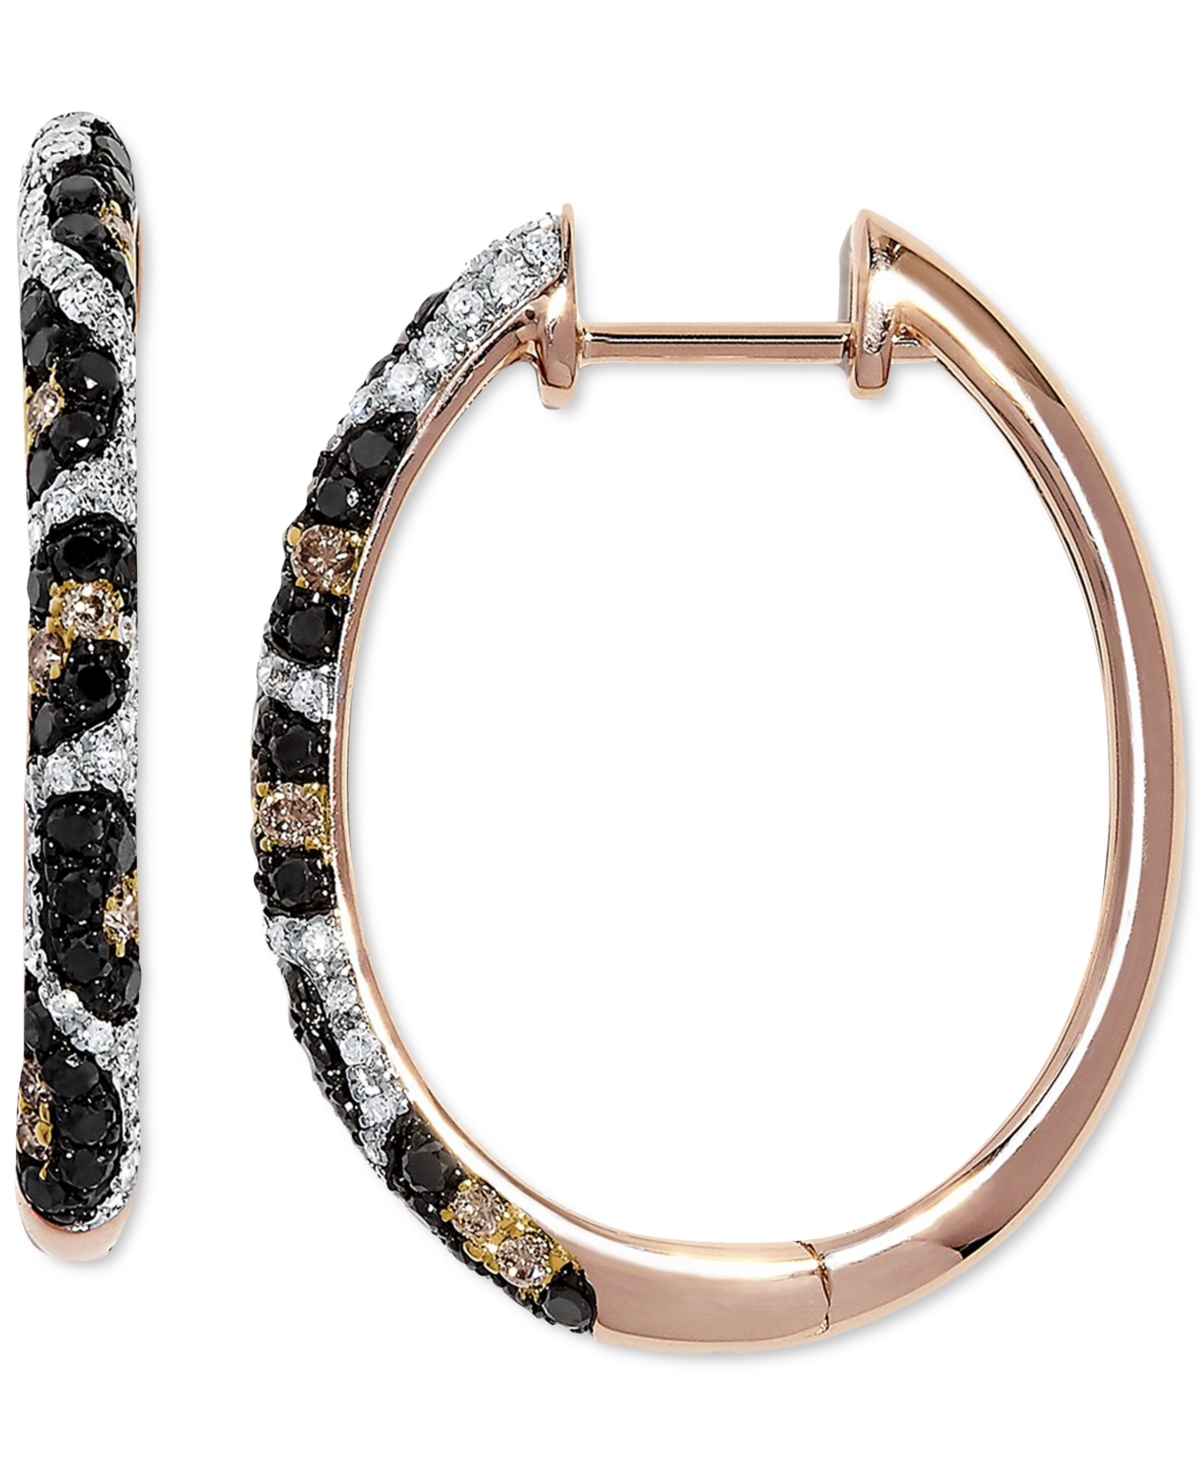 Effy Collection Effy Multicolor Diamond Animal Print Small Hoop Earrings (3/8 ct. t.w.) in 14k Rose Gold